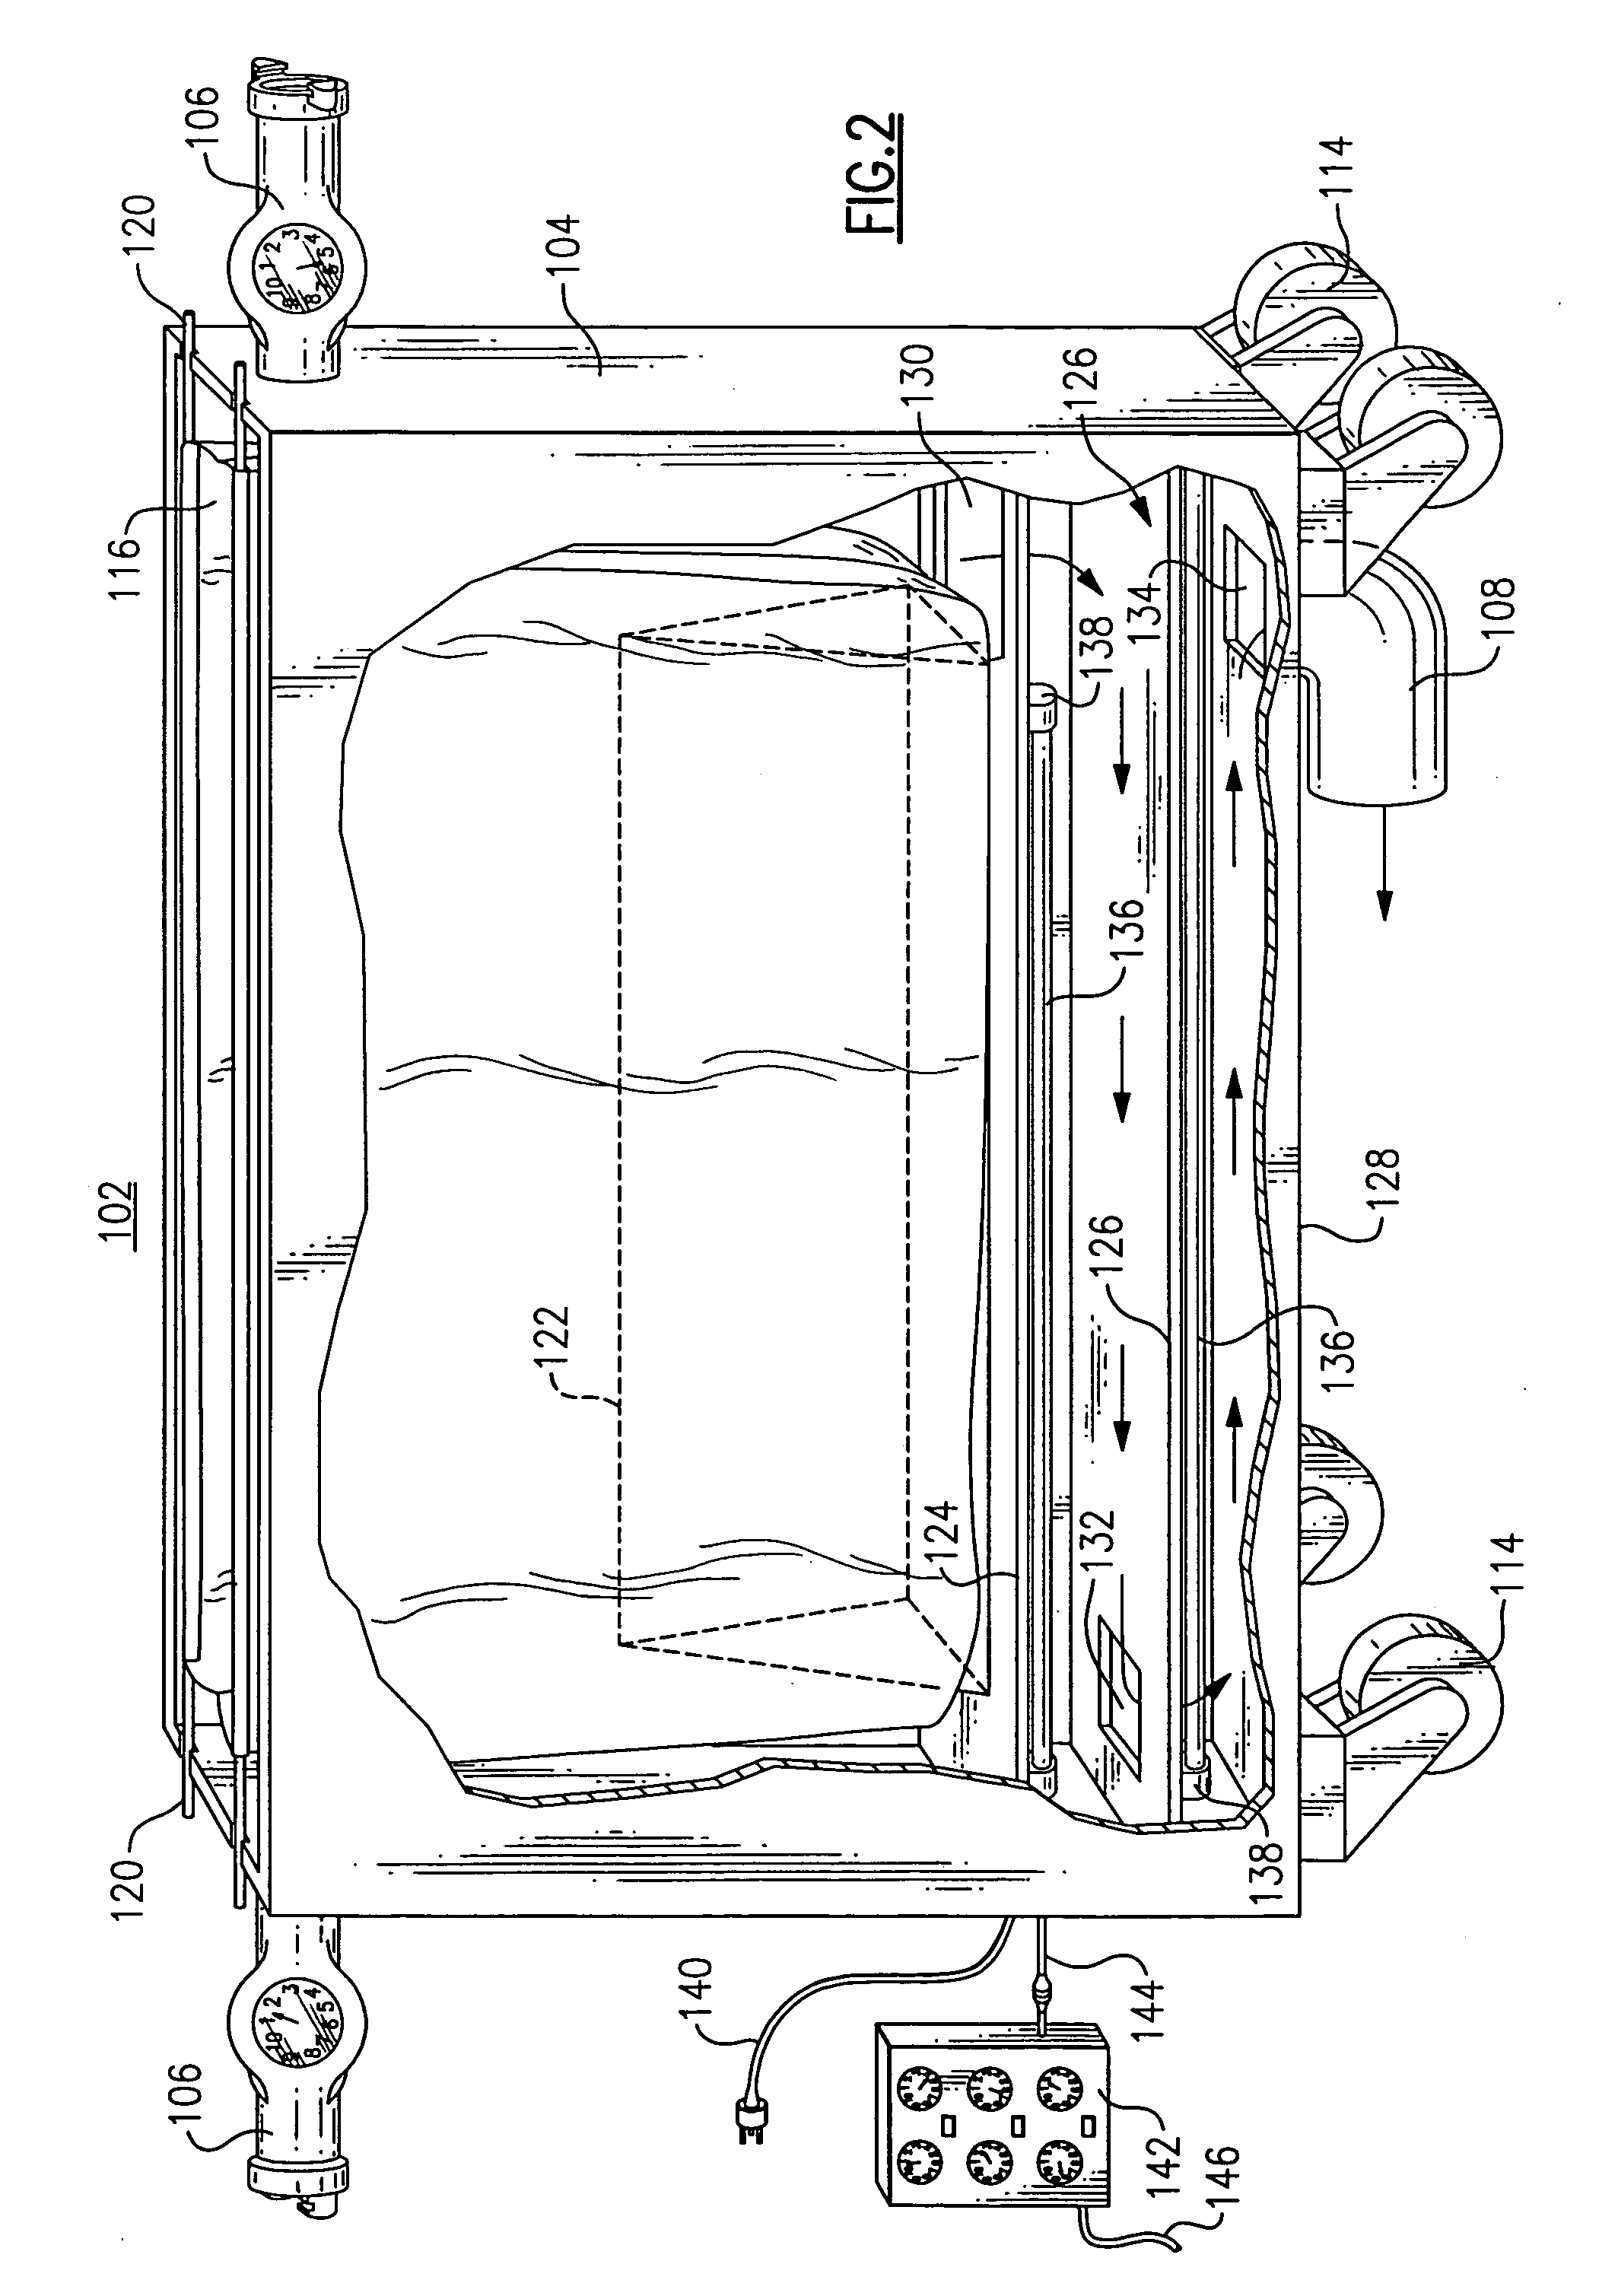 Ballast water treatment systems including related apparatus and methods